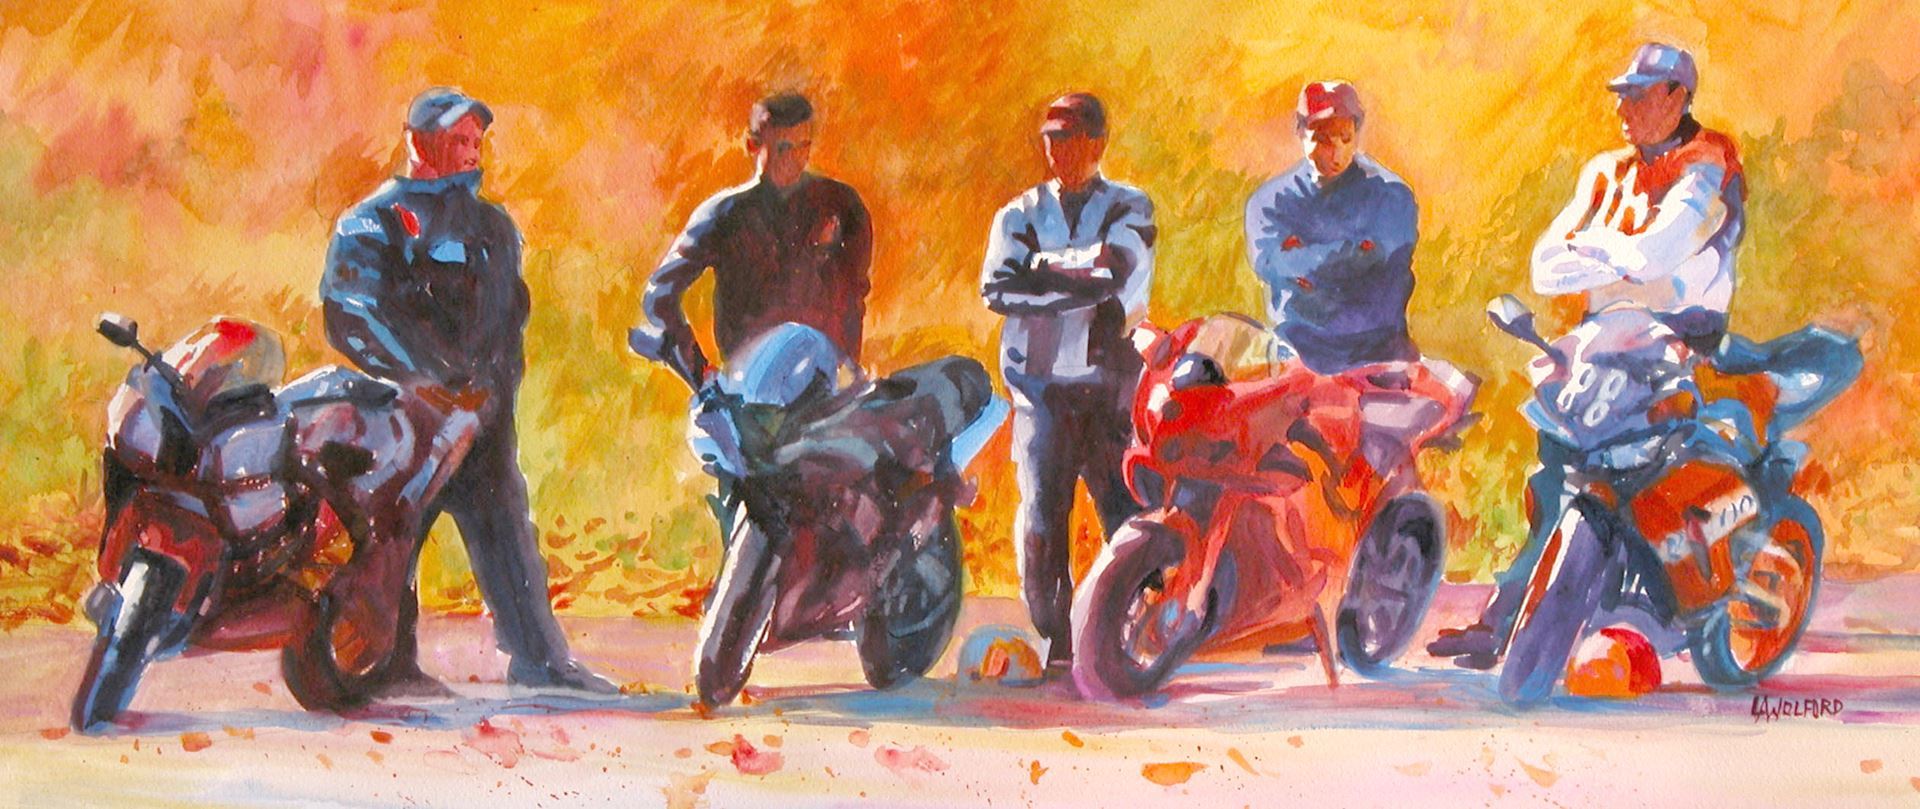 Rocket riders, watermedia painting by L. Wolford, five figures standing with motorcycles in warm colors